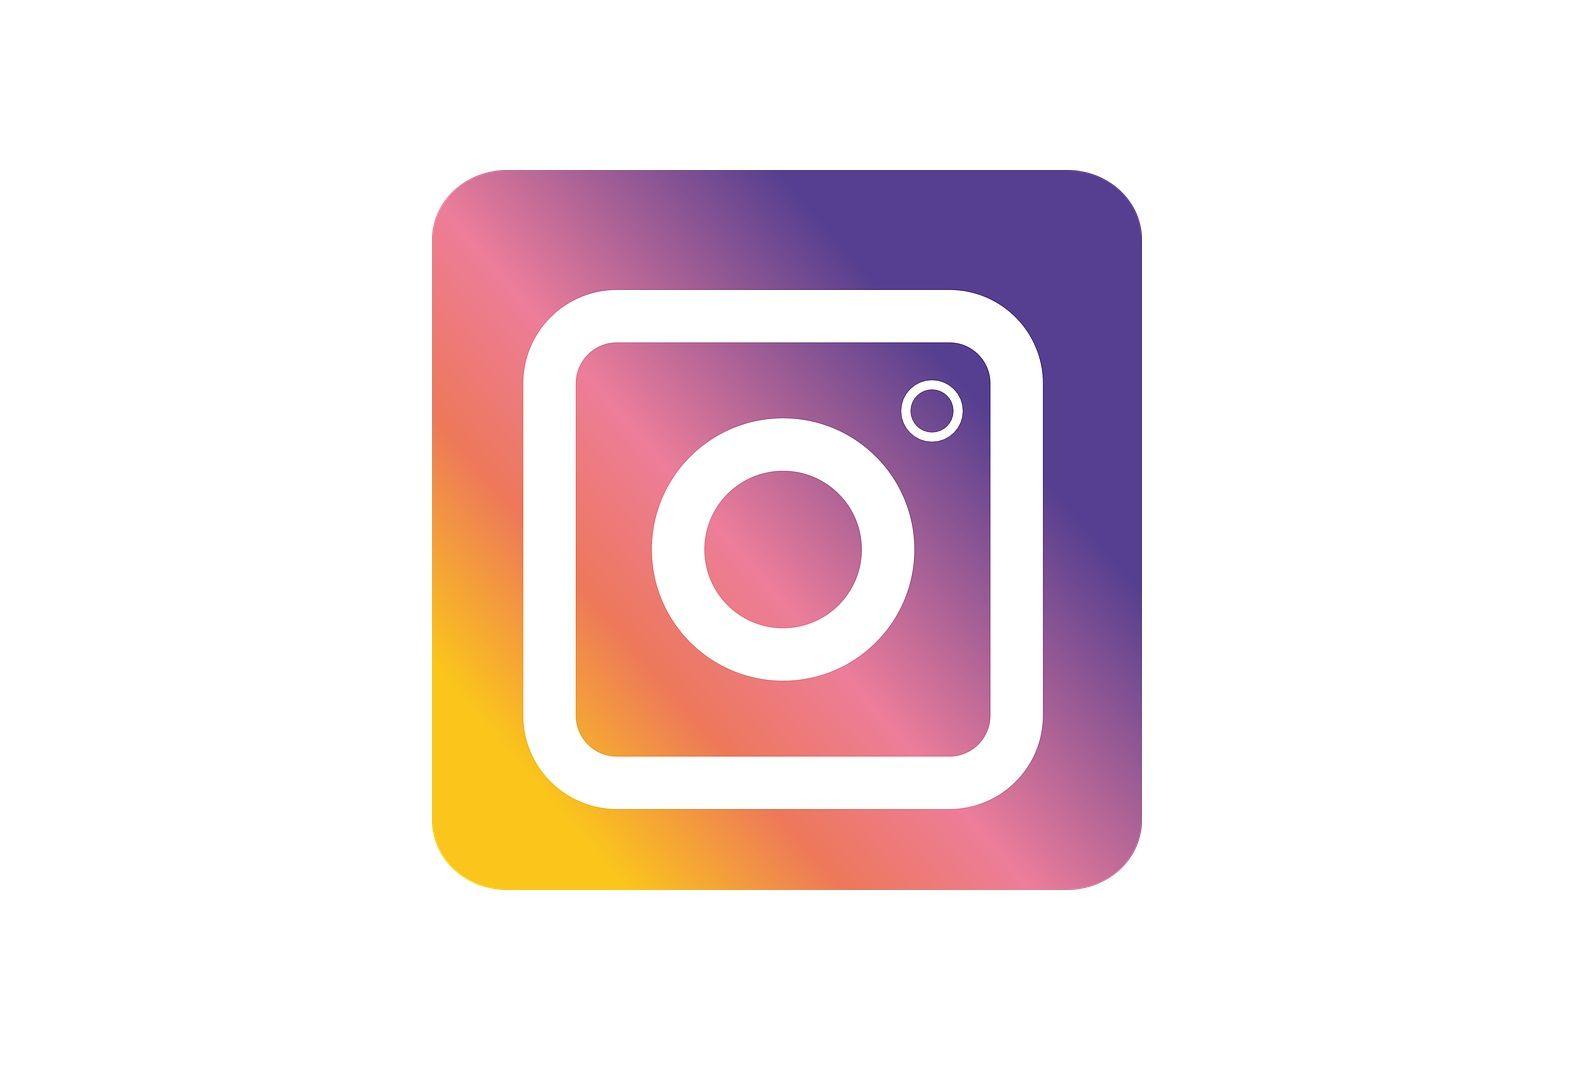 LinkedIn Instagram Logo - You can now request to get verified on Instagram's how to get